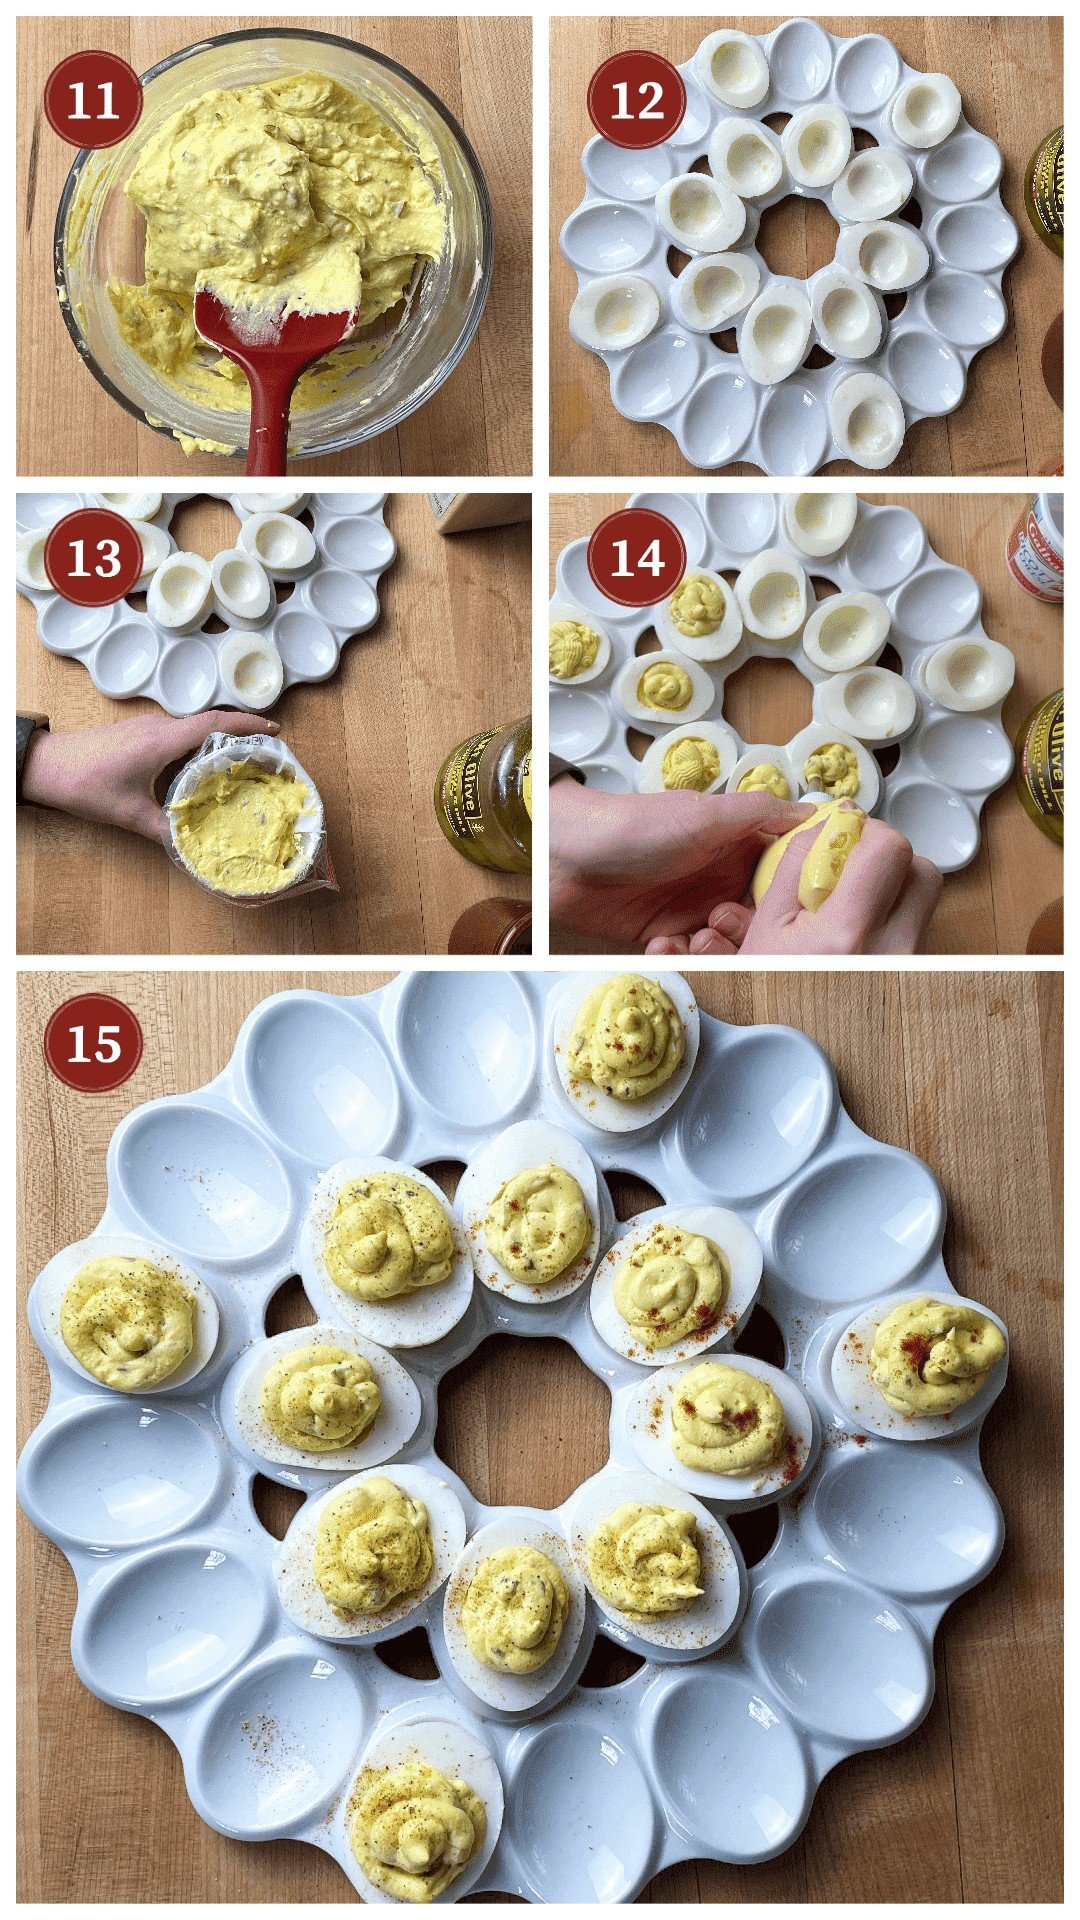 A collage of images showing how to make deviled eggs, steps 11 - 15.